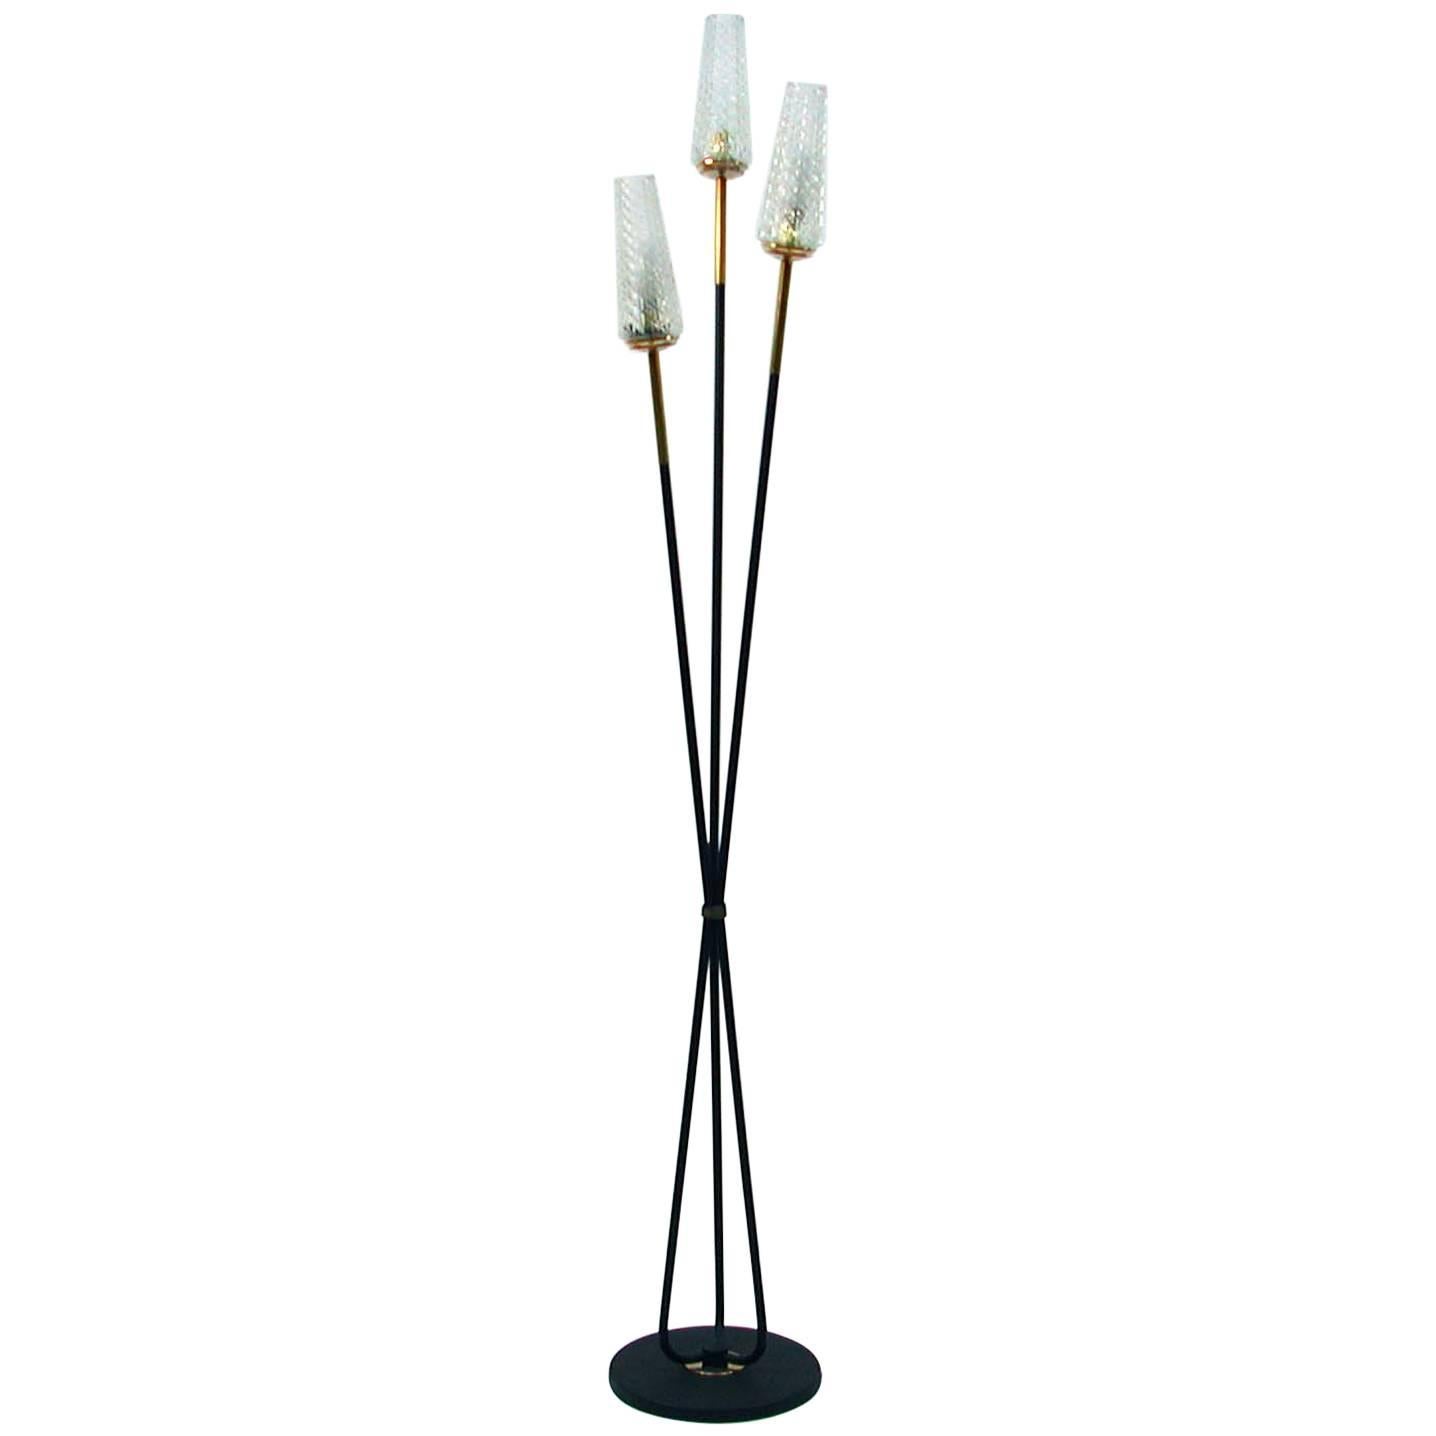 French 1950s Midcentury Floor Lamp in the Manner of Maison Arlus